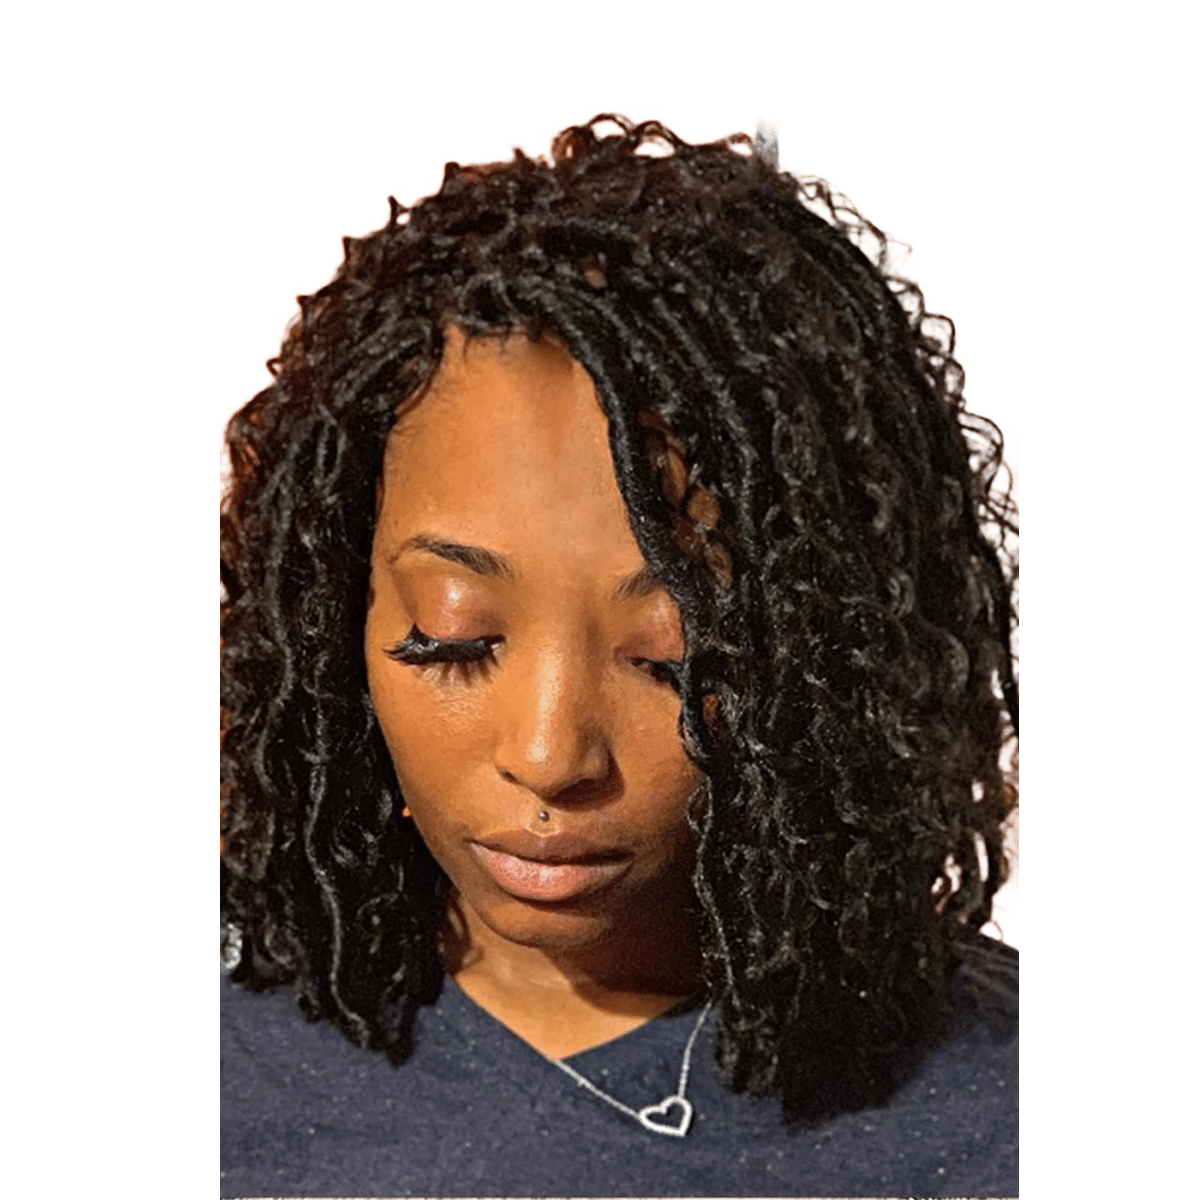 Kalyss 13 Braided Lace Front Wig with Baby Hair - Faux Locs Synthetic Wig  for Black Women with Boho Curl - United Republic of Tanzania Shop